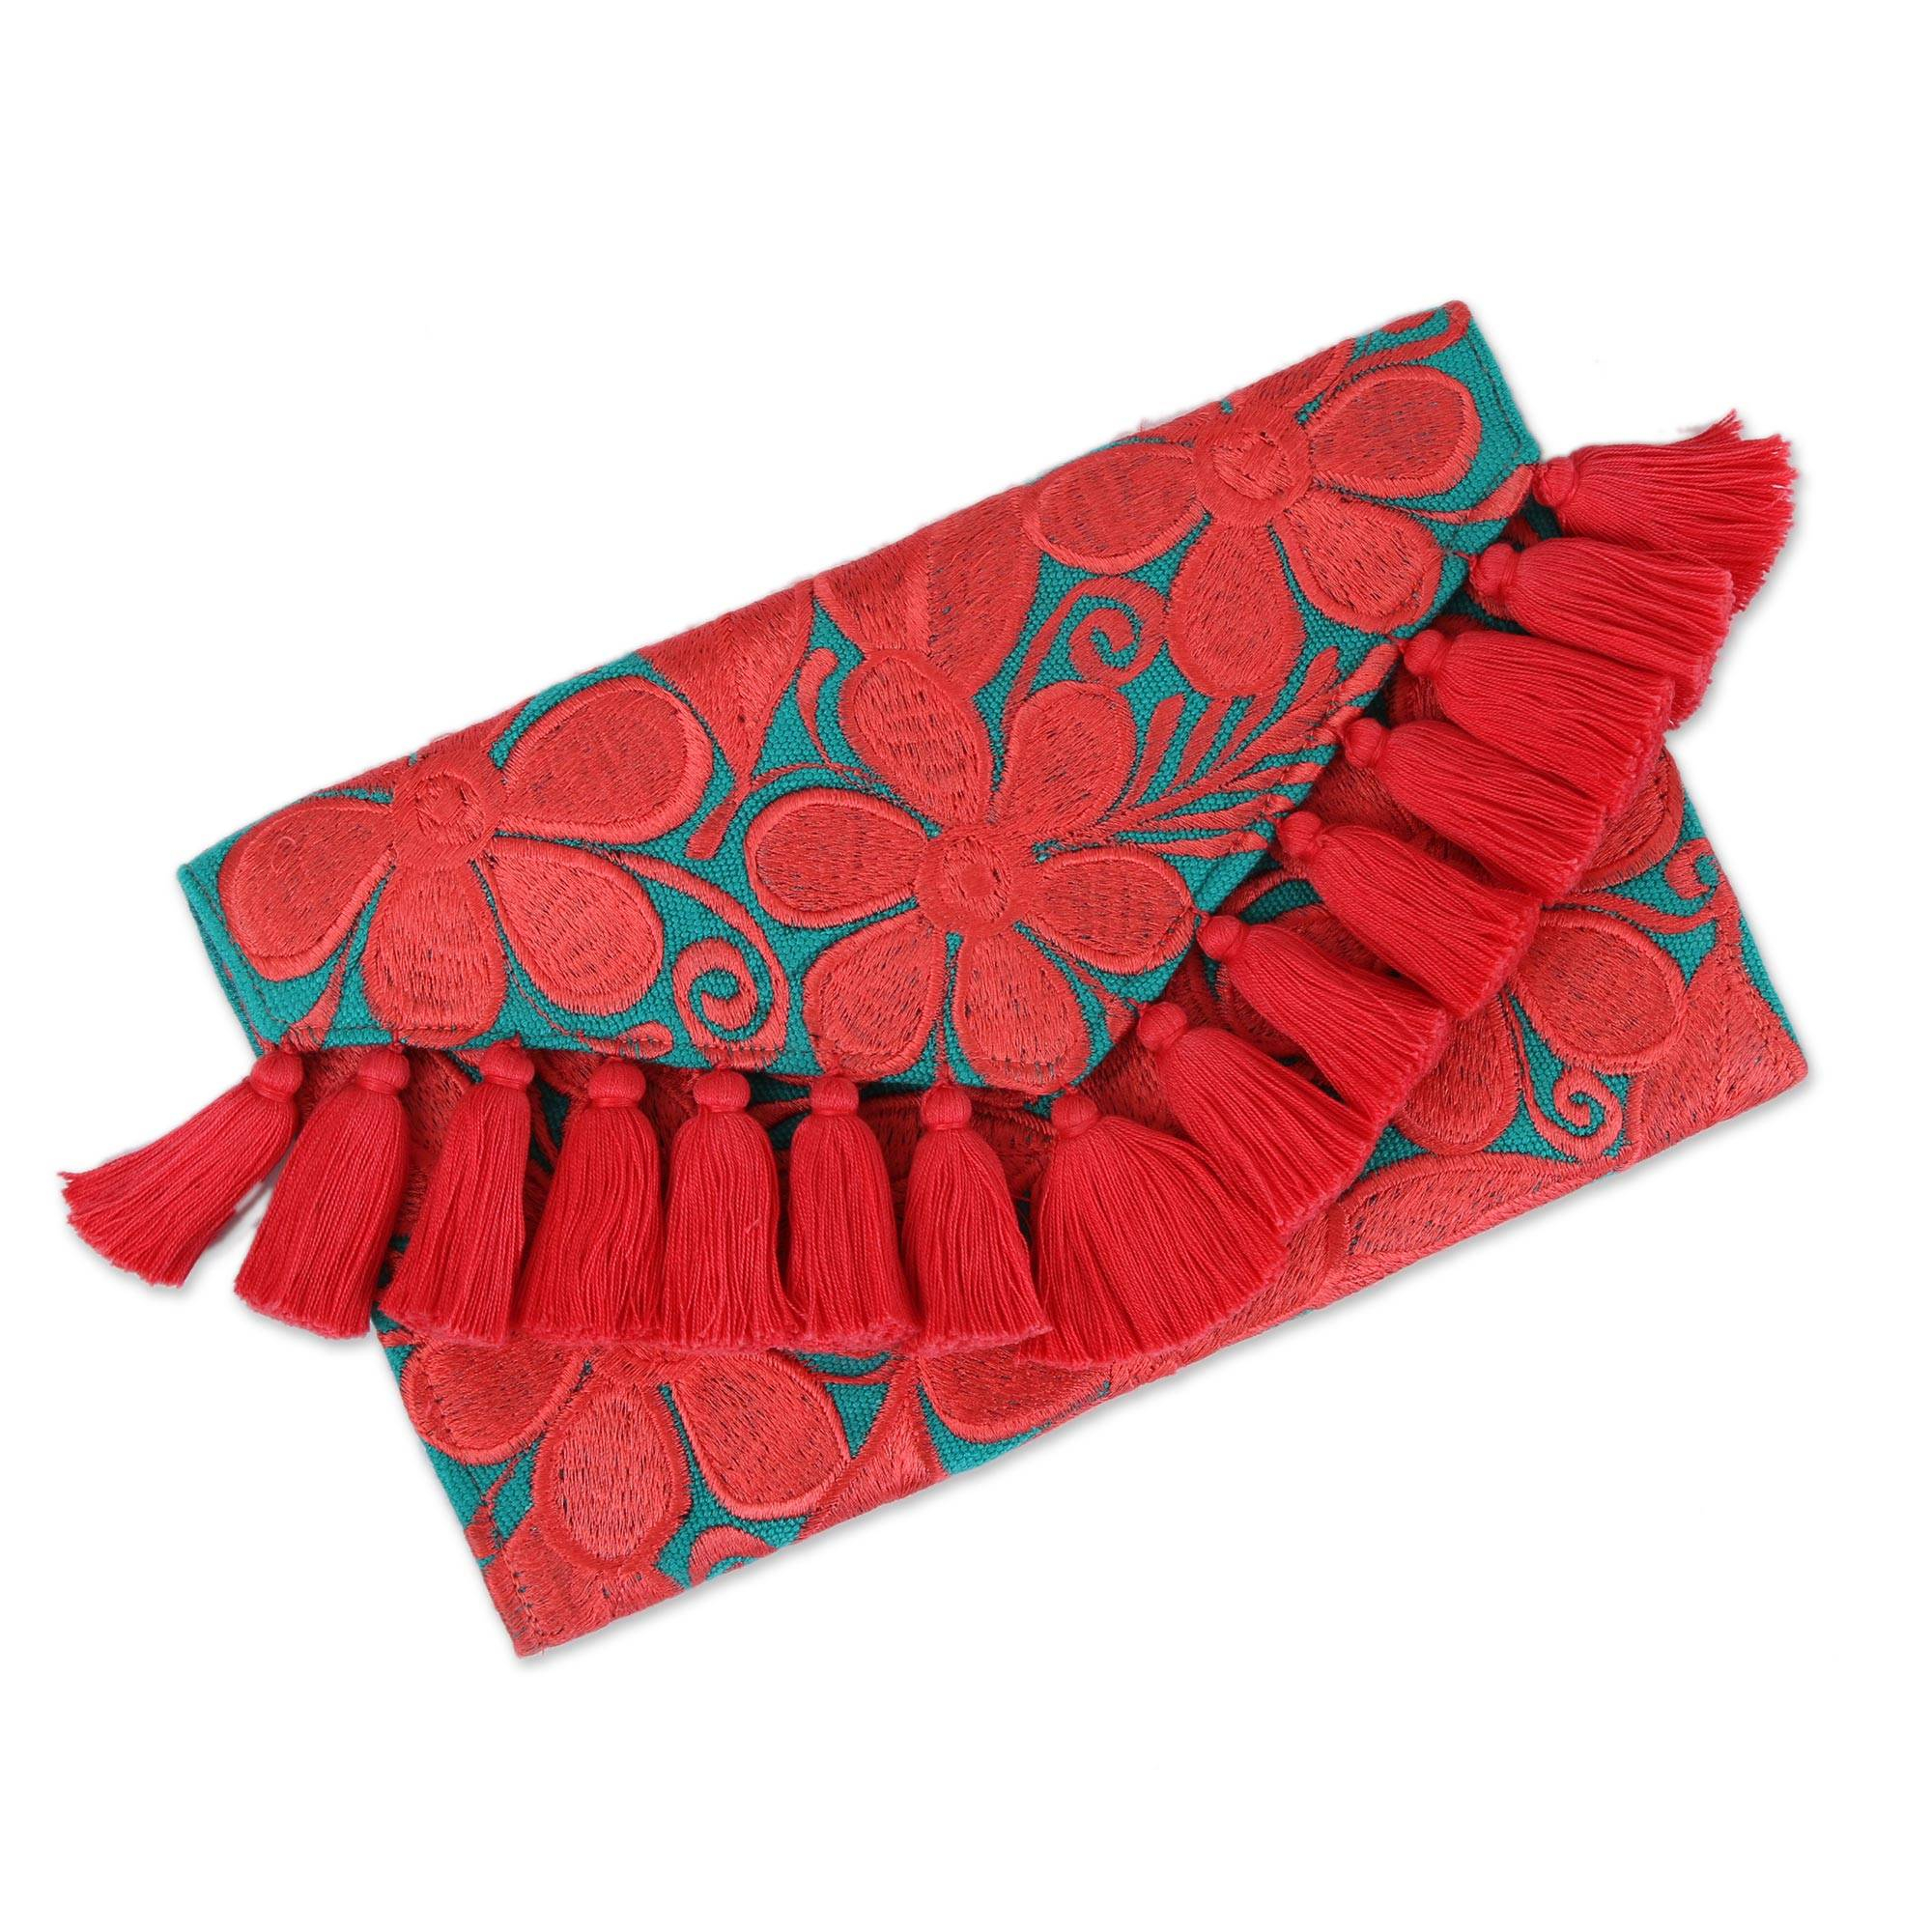 Mexican Flower Embroidery Patterns Cotton Clutch With Deep Rose Floral Embroidery From Mexico Deep Rose Flowers